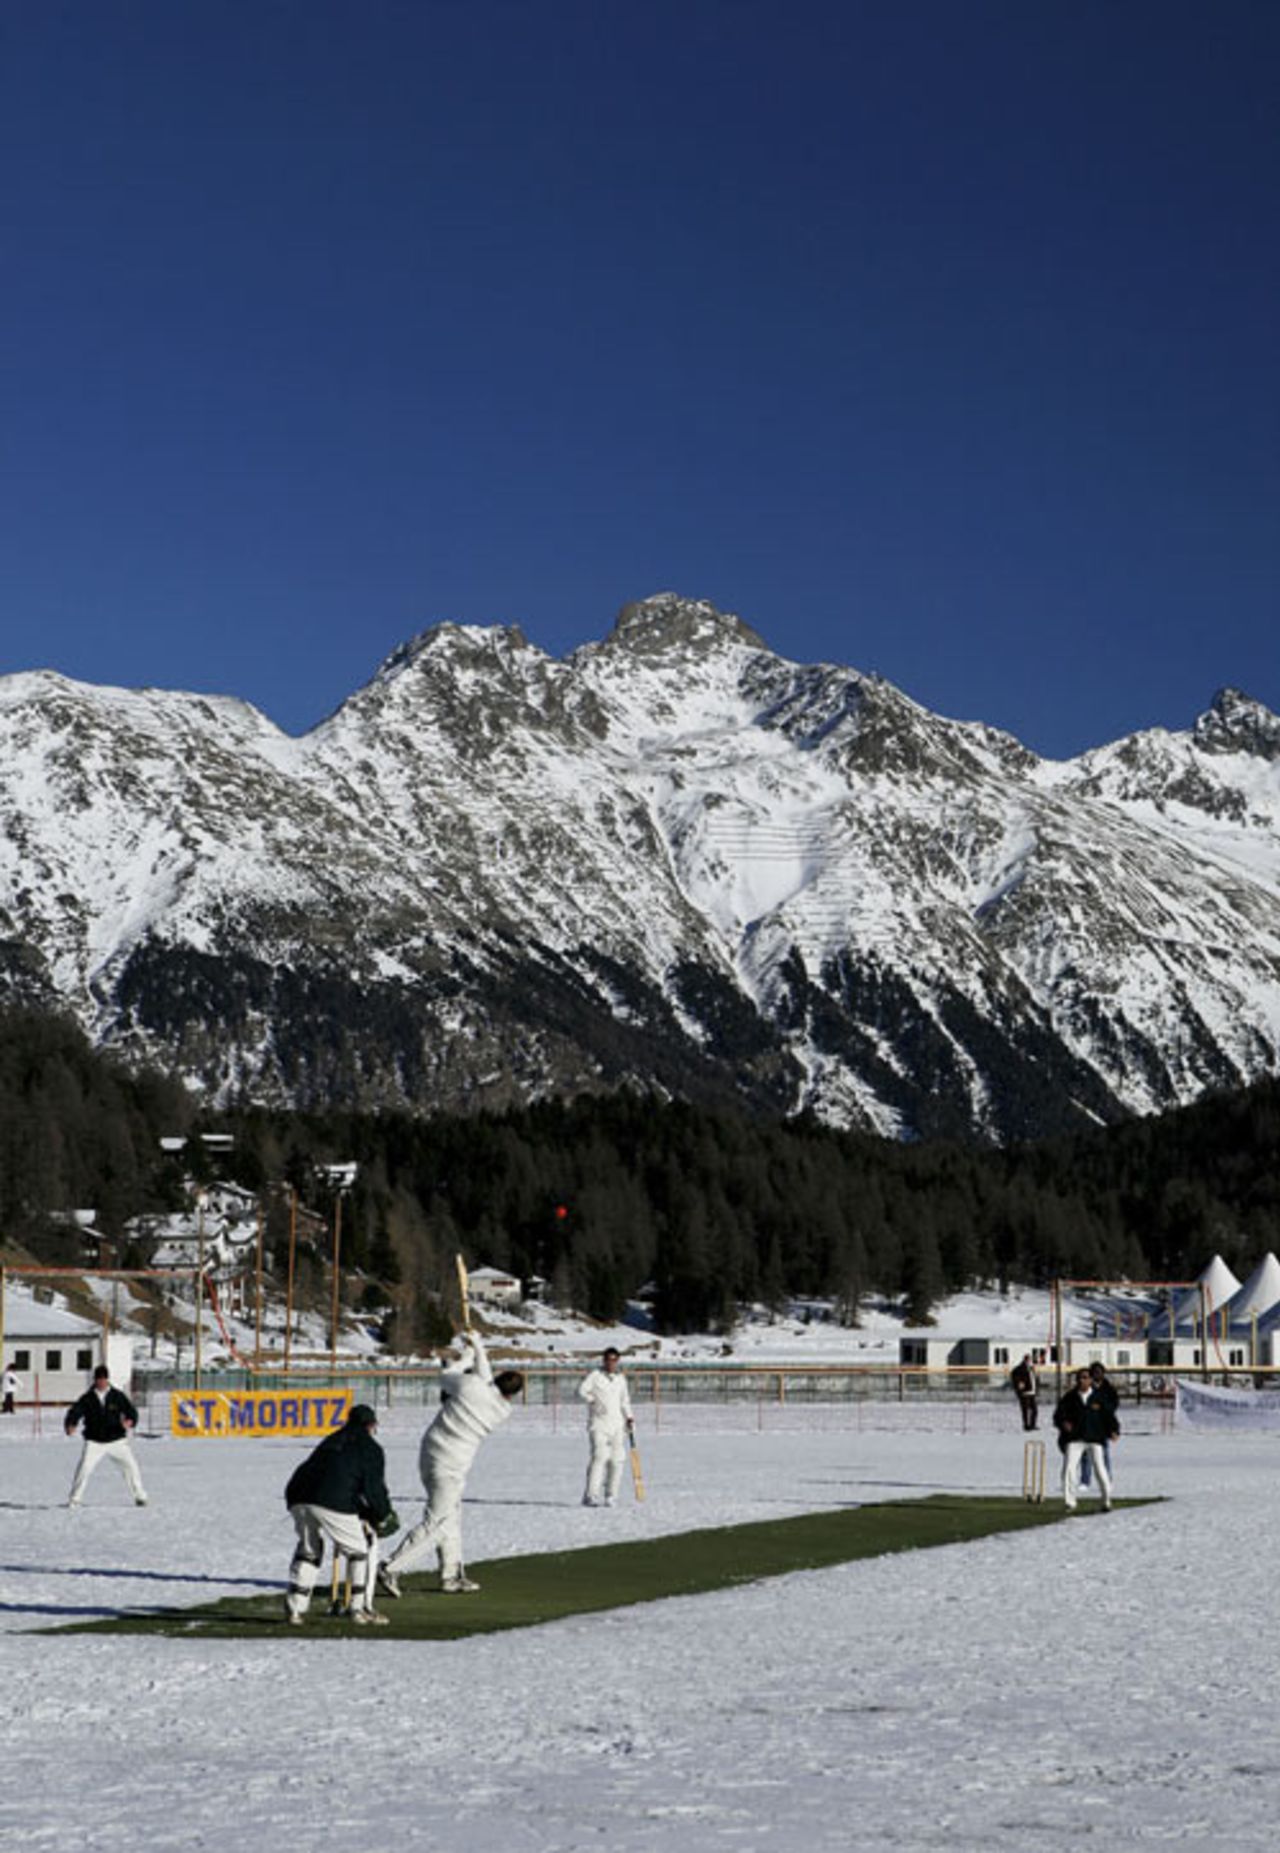 Winterthur XI play Old Salopians XI during the 19th Cricket Tournament on Ice held on the frozen surface of Lake St. Moritz, Switzerland,February 2, 2007